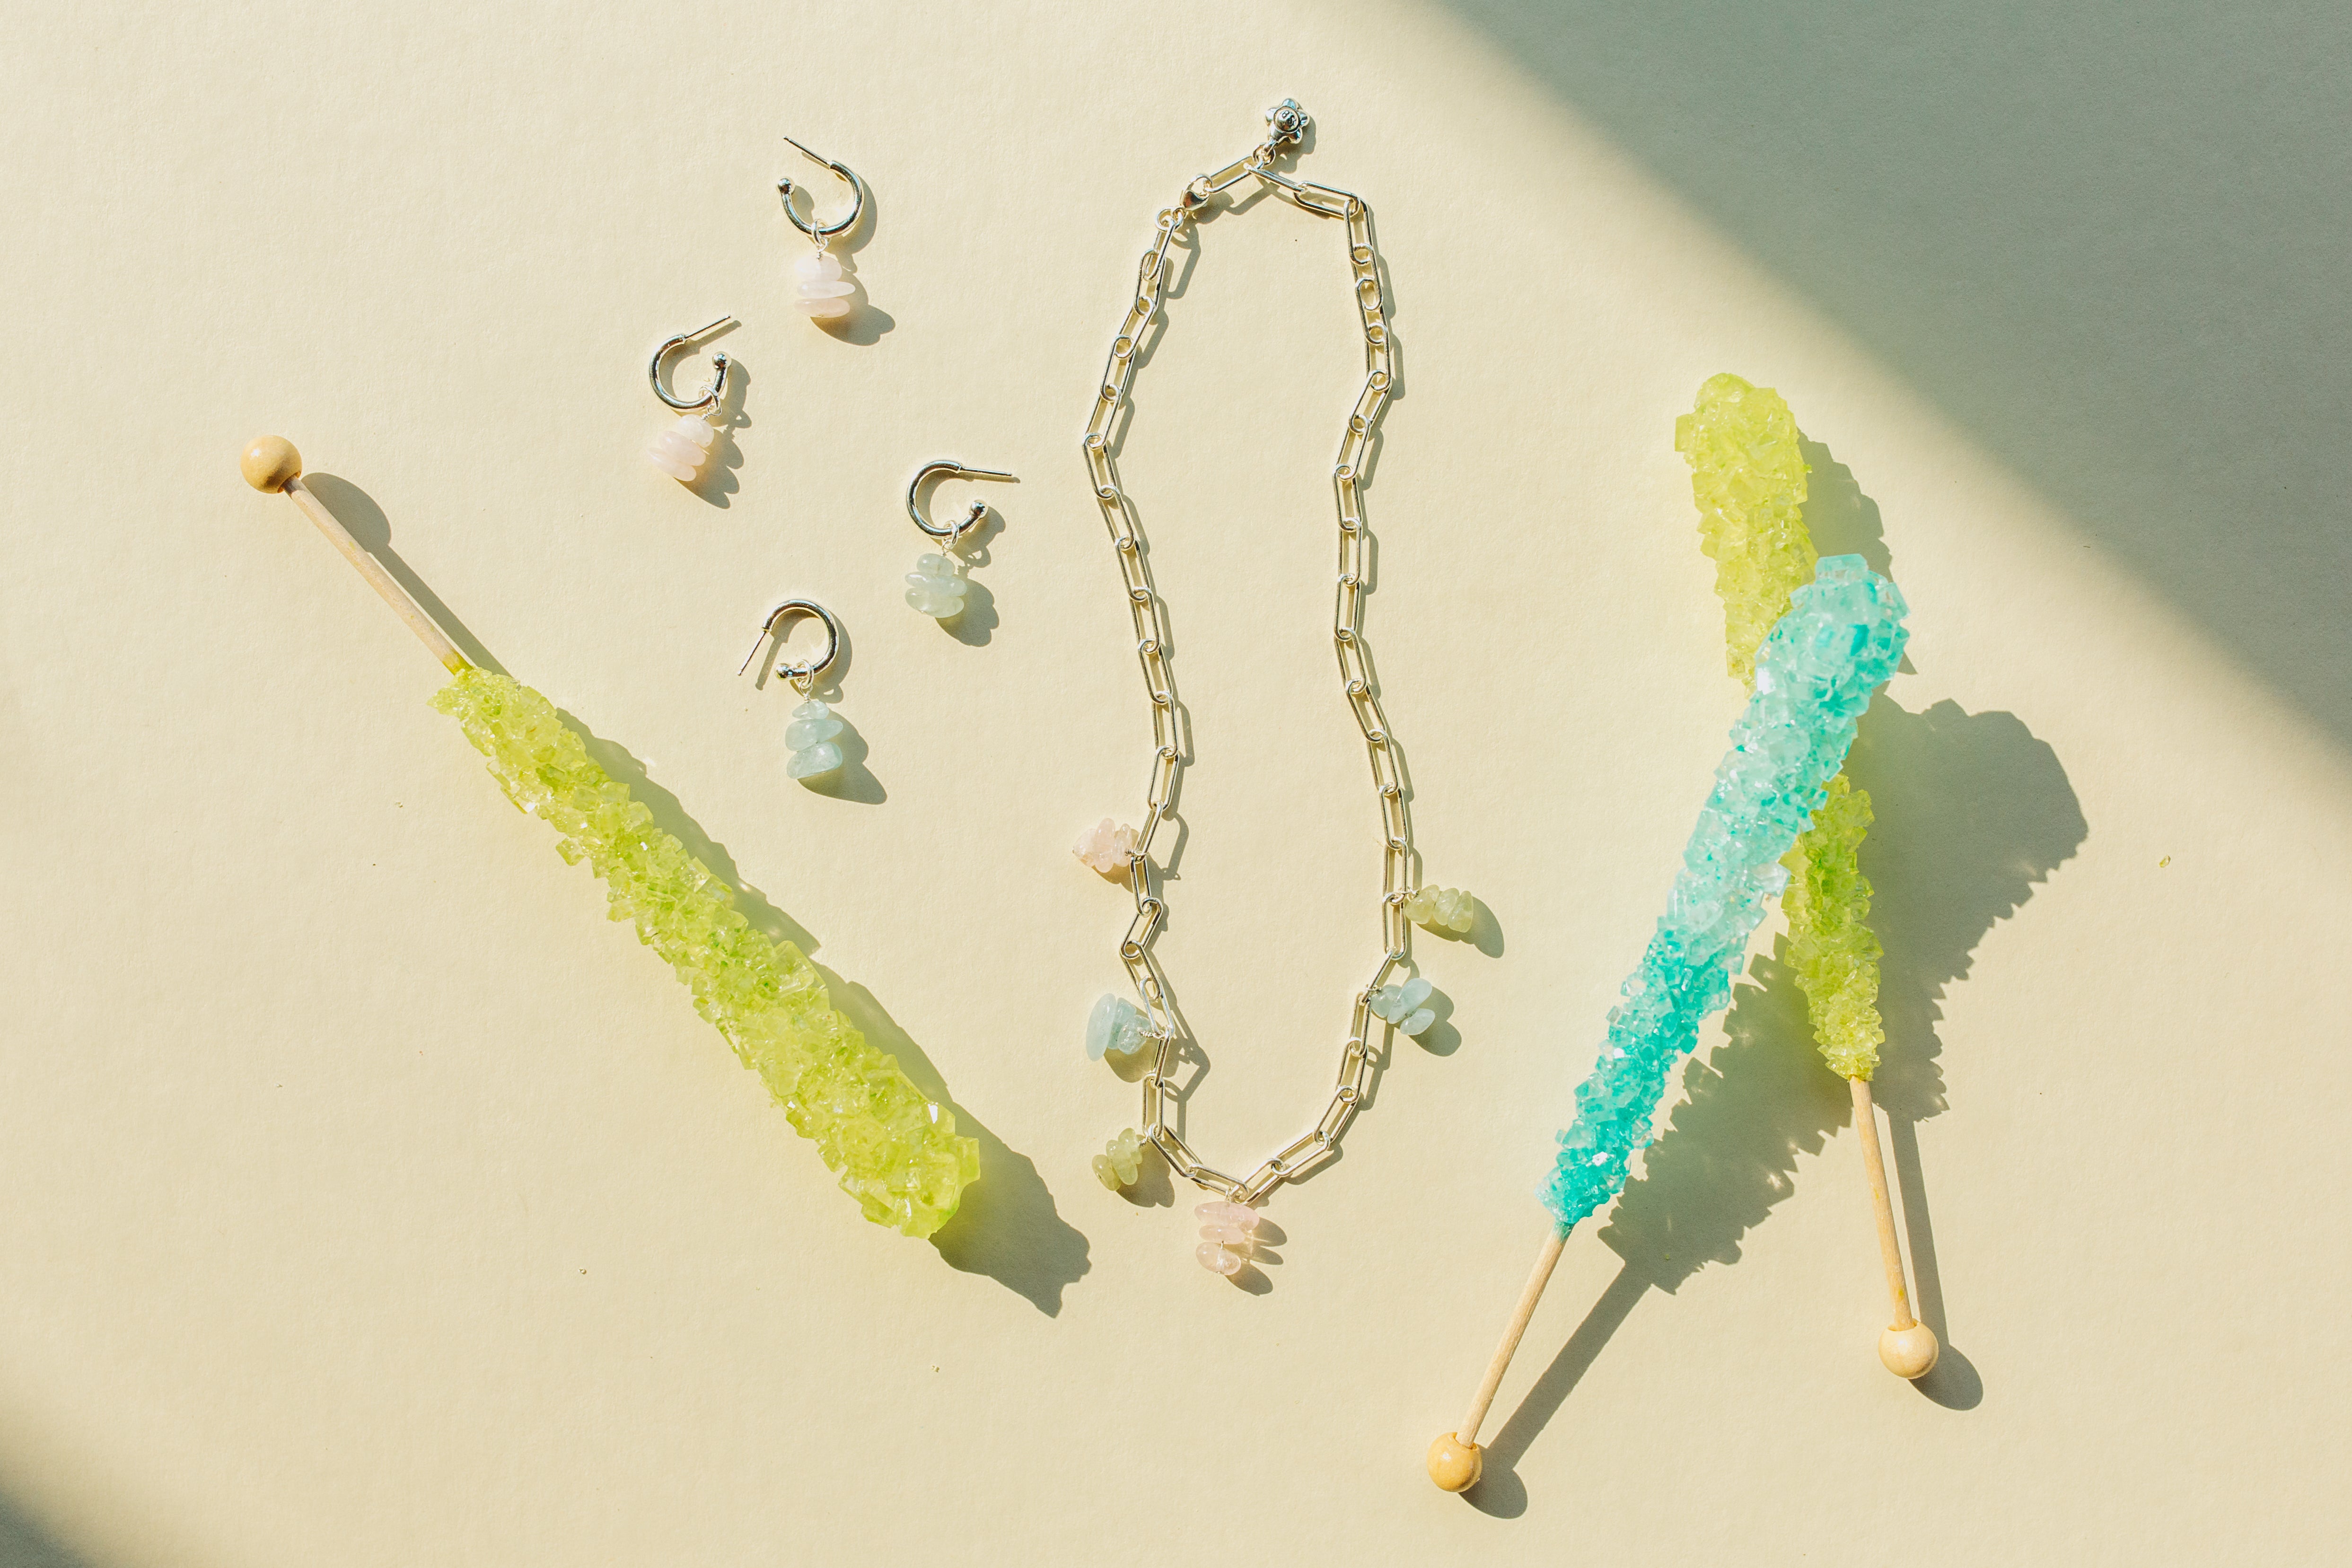 ROCK CANDY